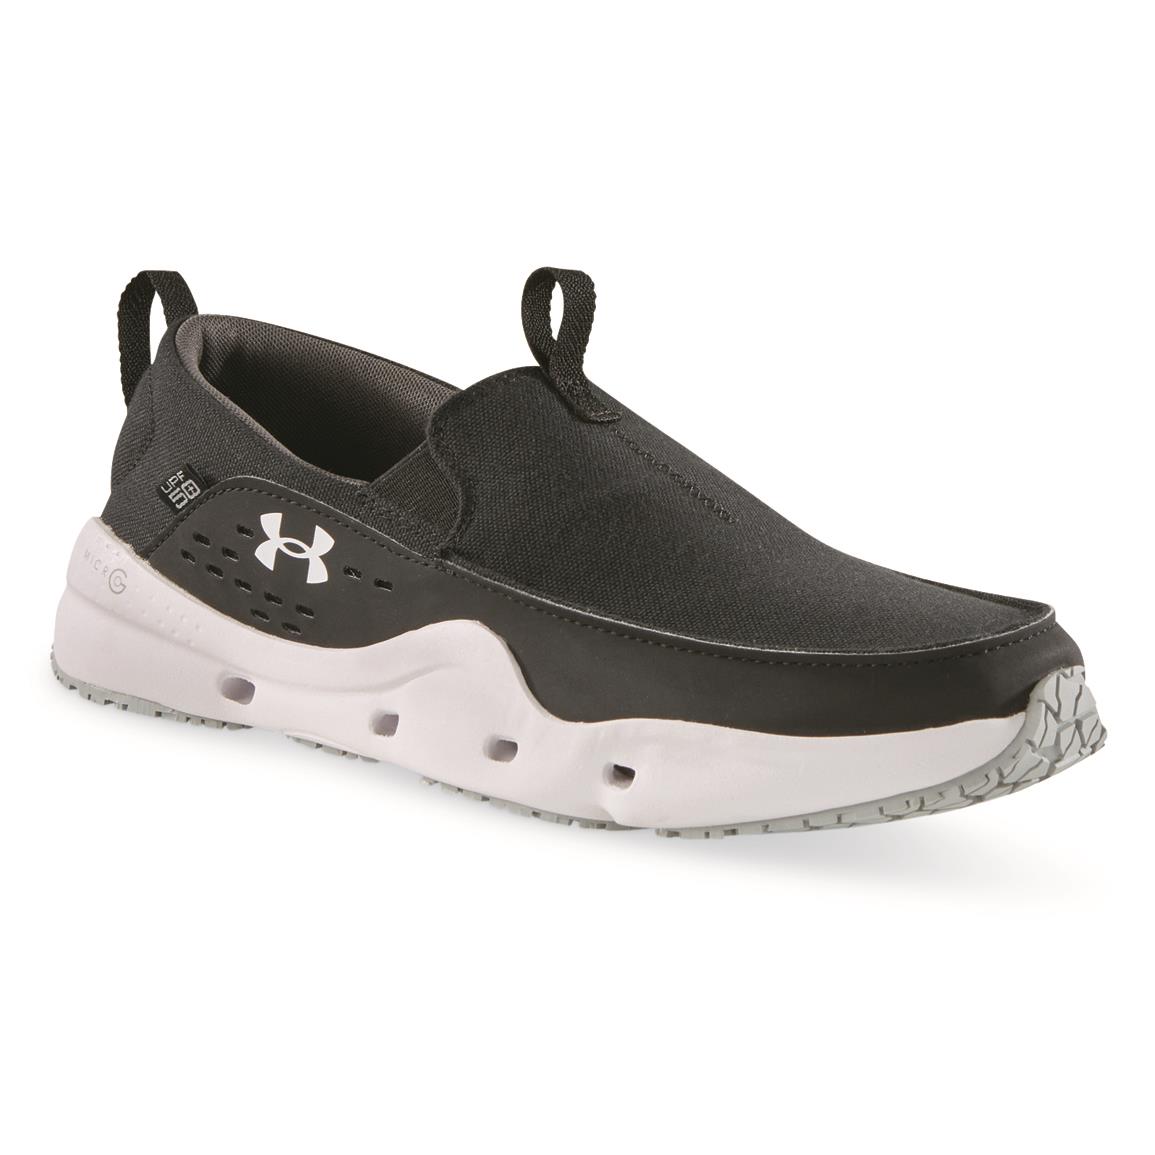 Under Armour Men's Micro G Kilchis Slip Recover Fishing Shoes - Black, 10